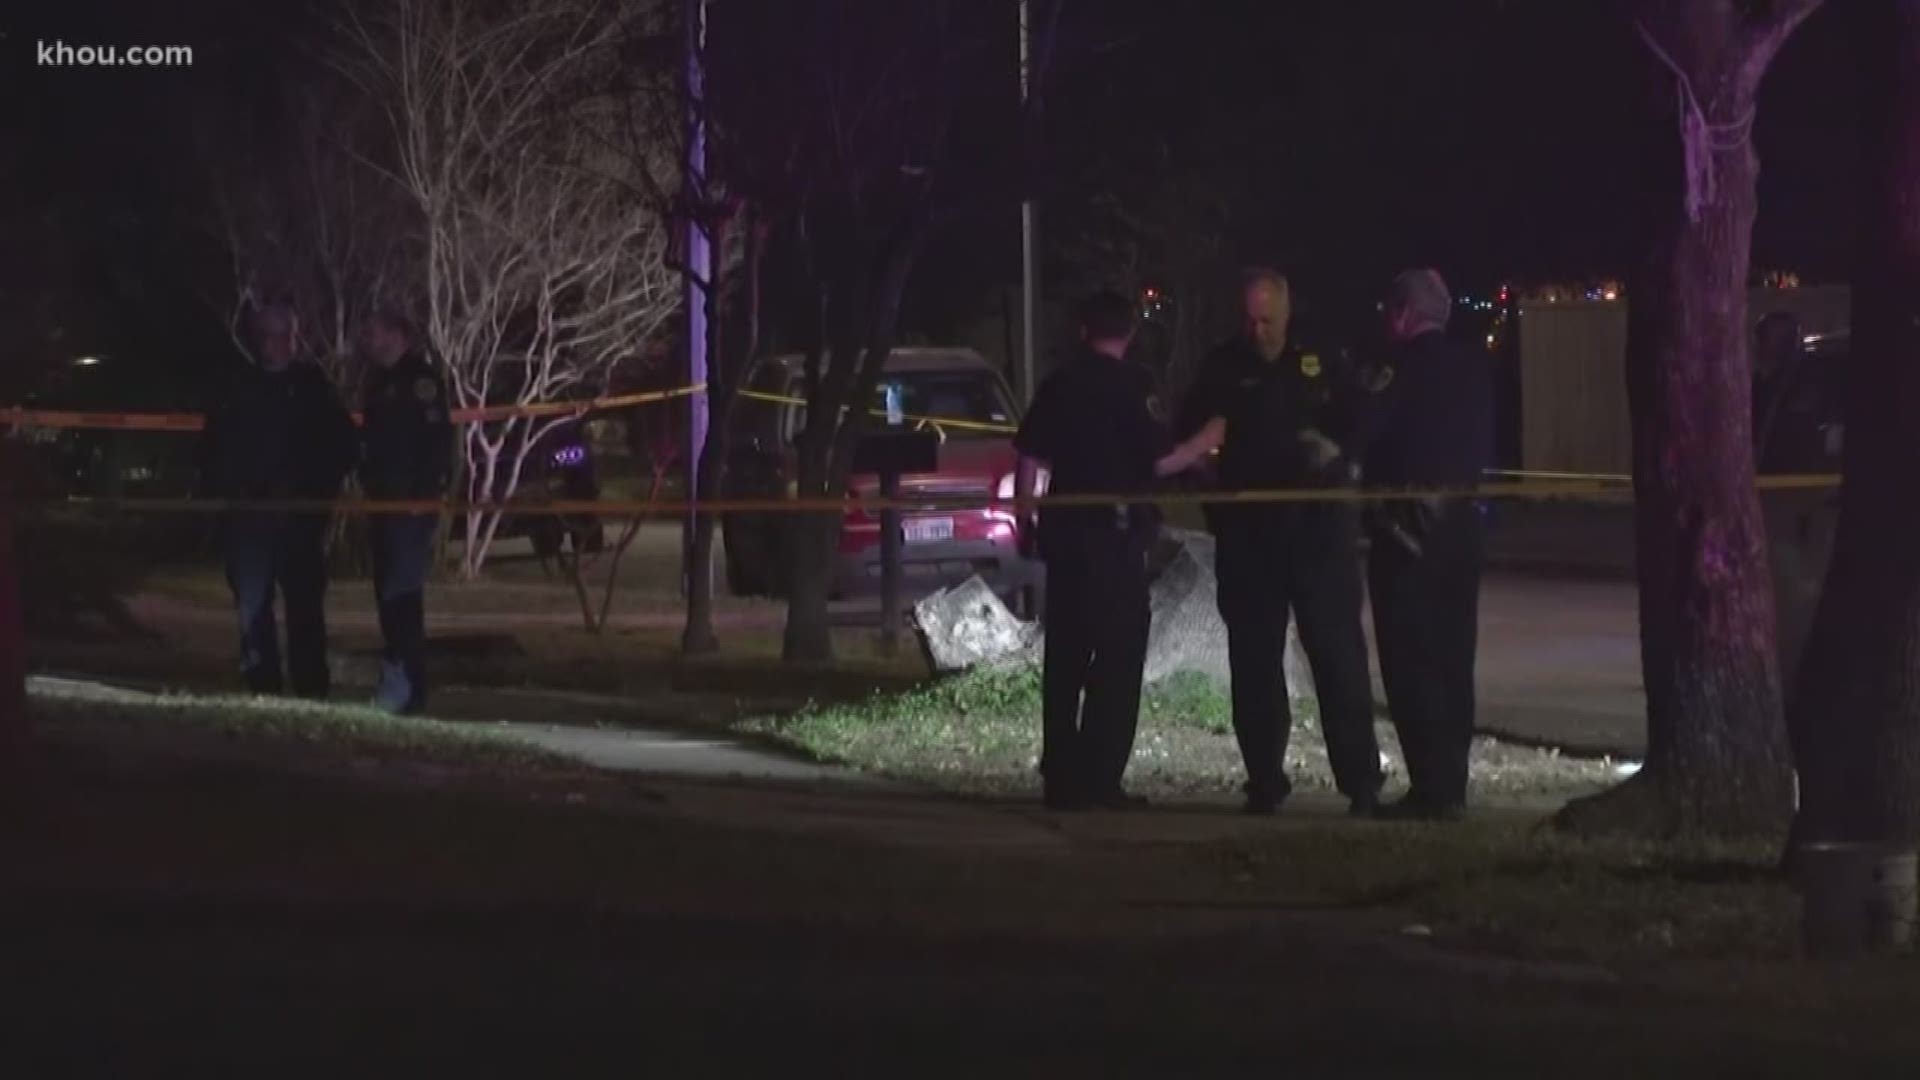 A mother died after she and her daughter were shot inside of their southwest Houston home on New Year’s Eve.